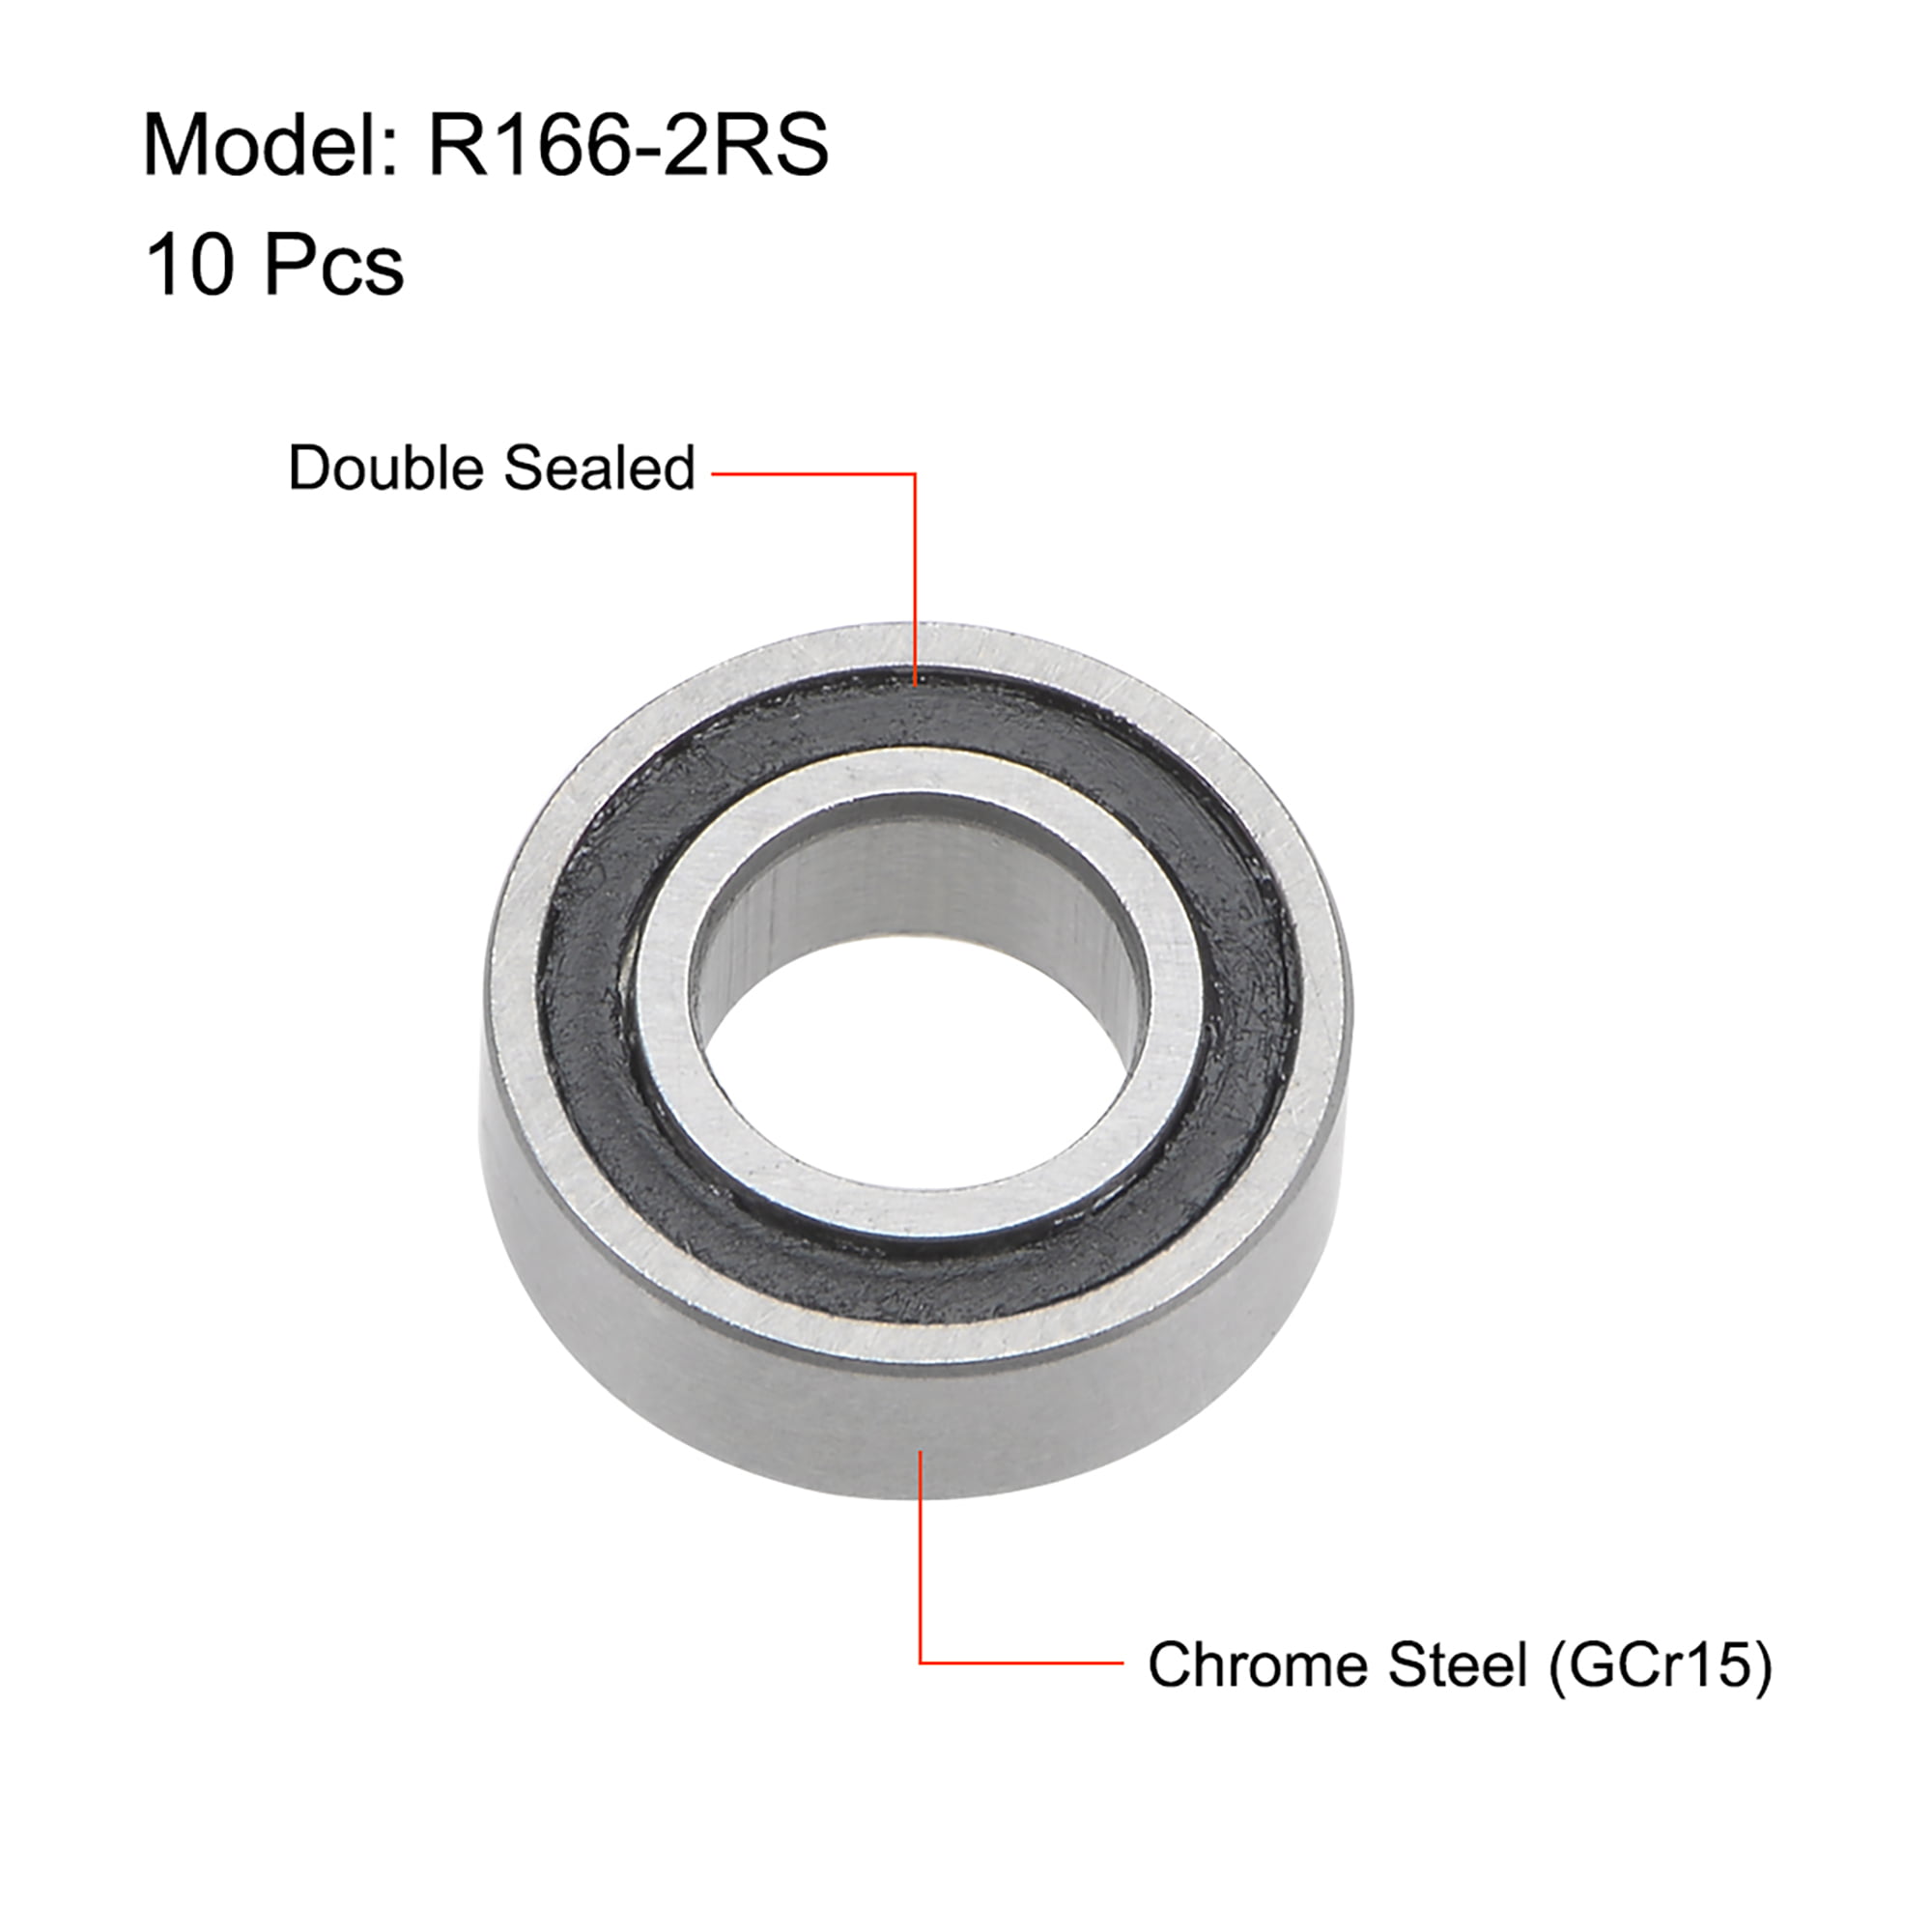 R166-2RS Deep Groove Ball Bearing 3/16"x3/8"x1/8" Sealed Z2 Lever Bearings 10pcs